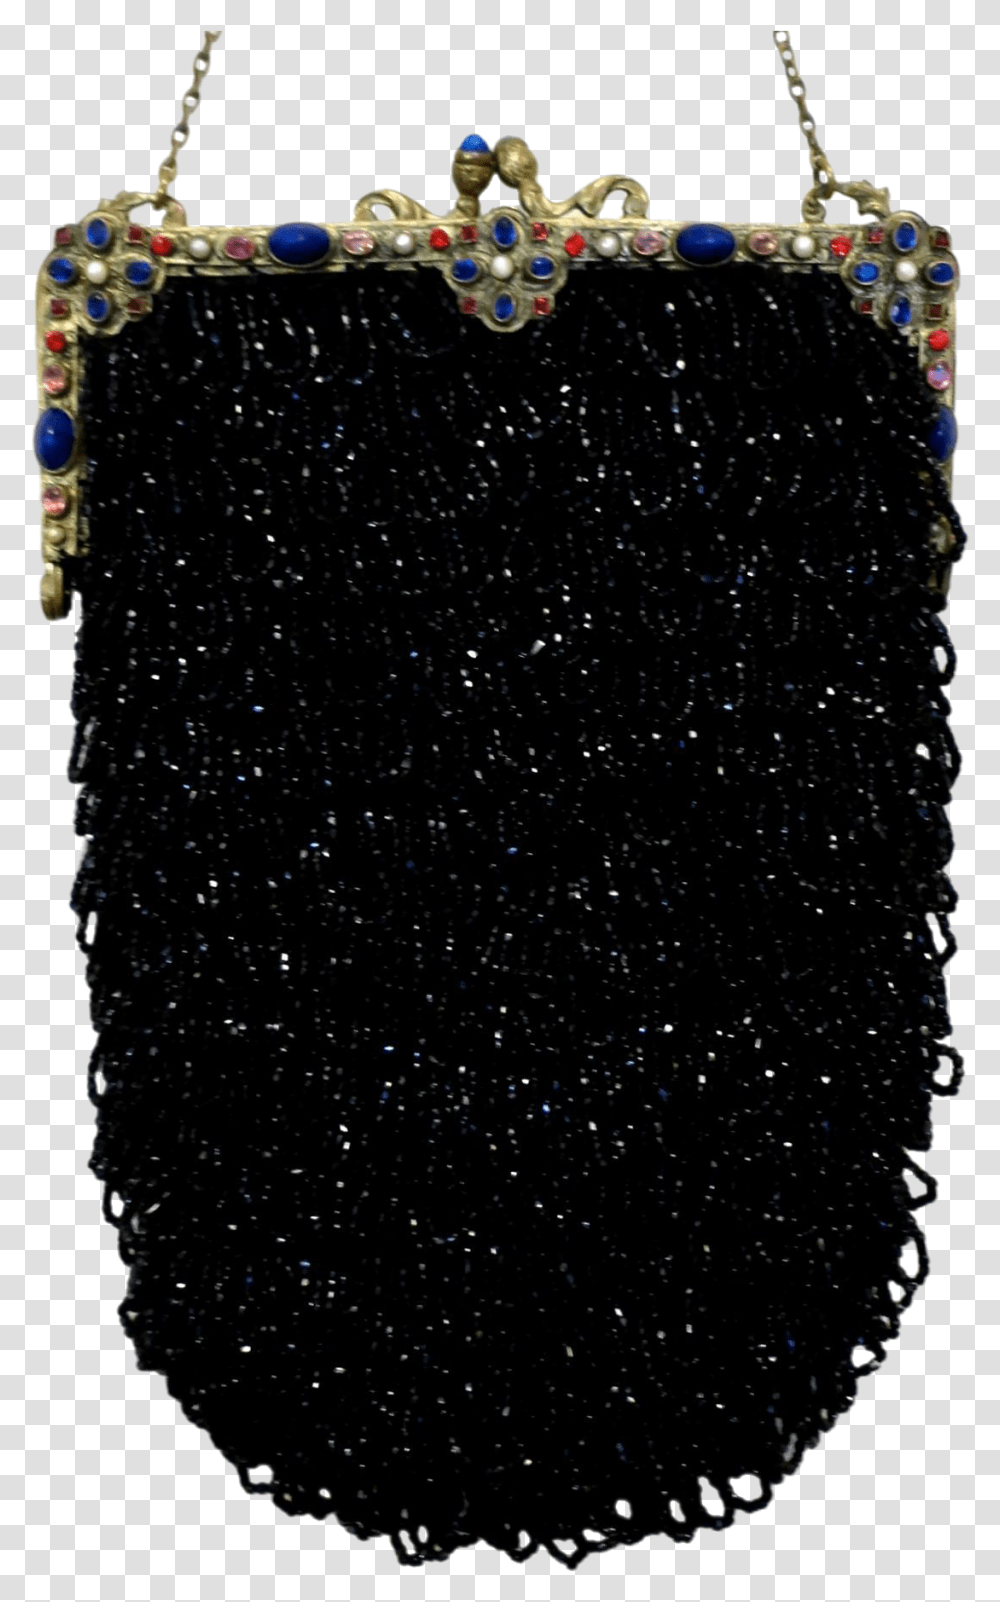 Vintage Beaded Purse Jewelled Encrusted Frame Black Chain, Outdoors, Nature, Handbag, Accessories Transparent Png